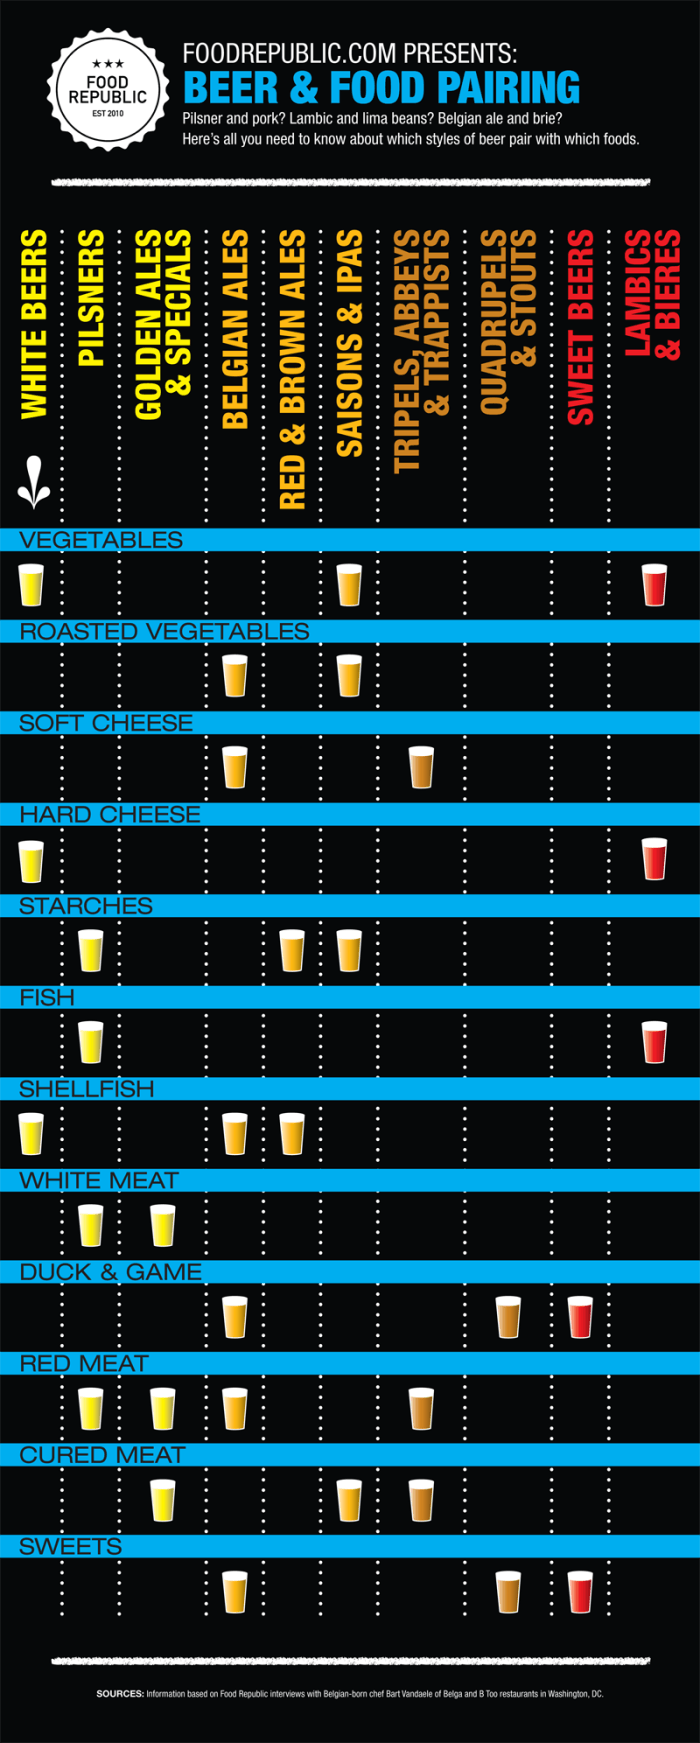 Find The Best Food And Beer Pairings With This Handy Chart